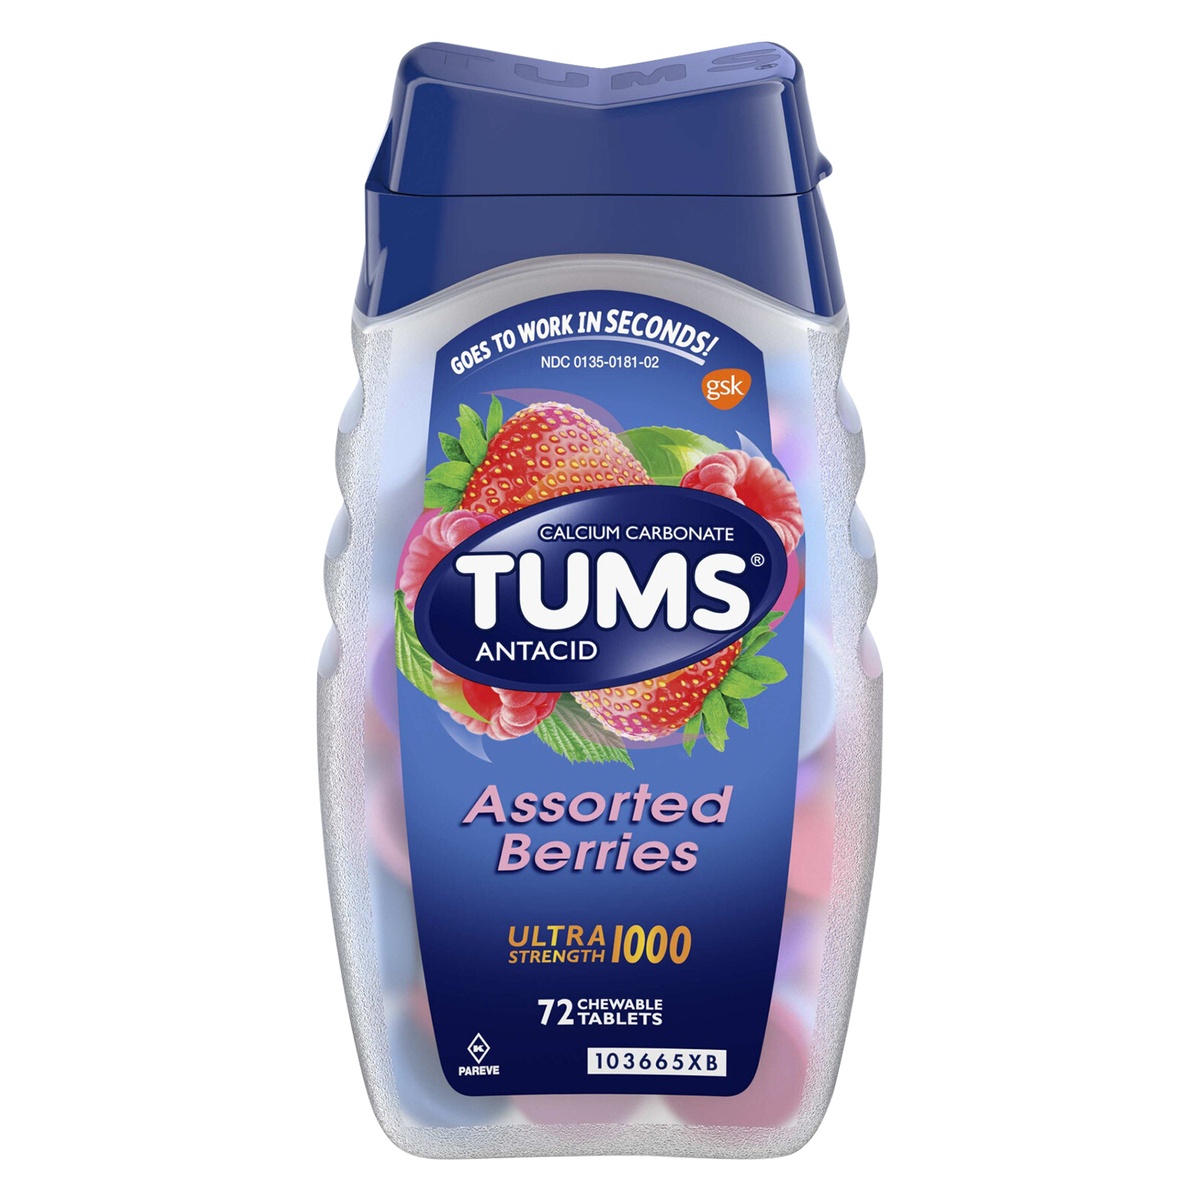 slide 1 of 1, TUMS Ultra Strength Chewable Antacid Tablets for Heartburn Relief, Assorted Berries - 72 Count, 72 ct